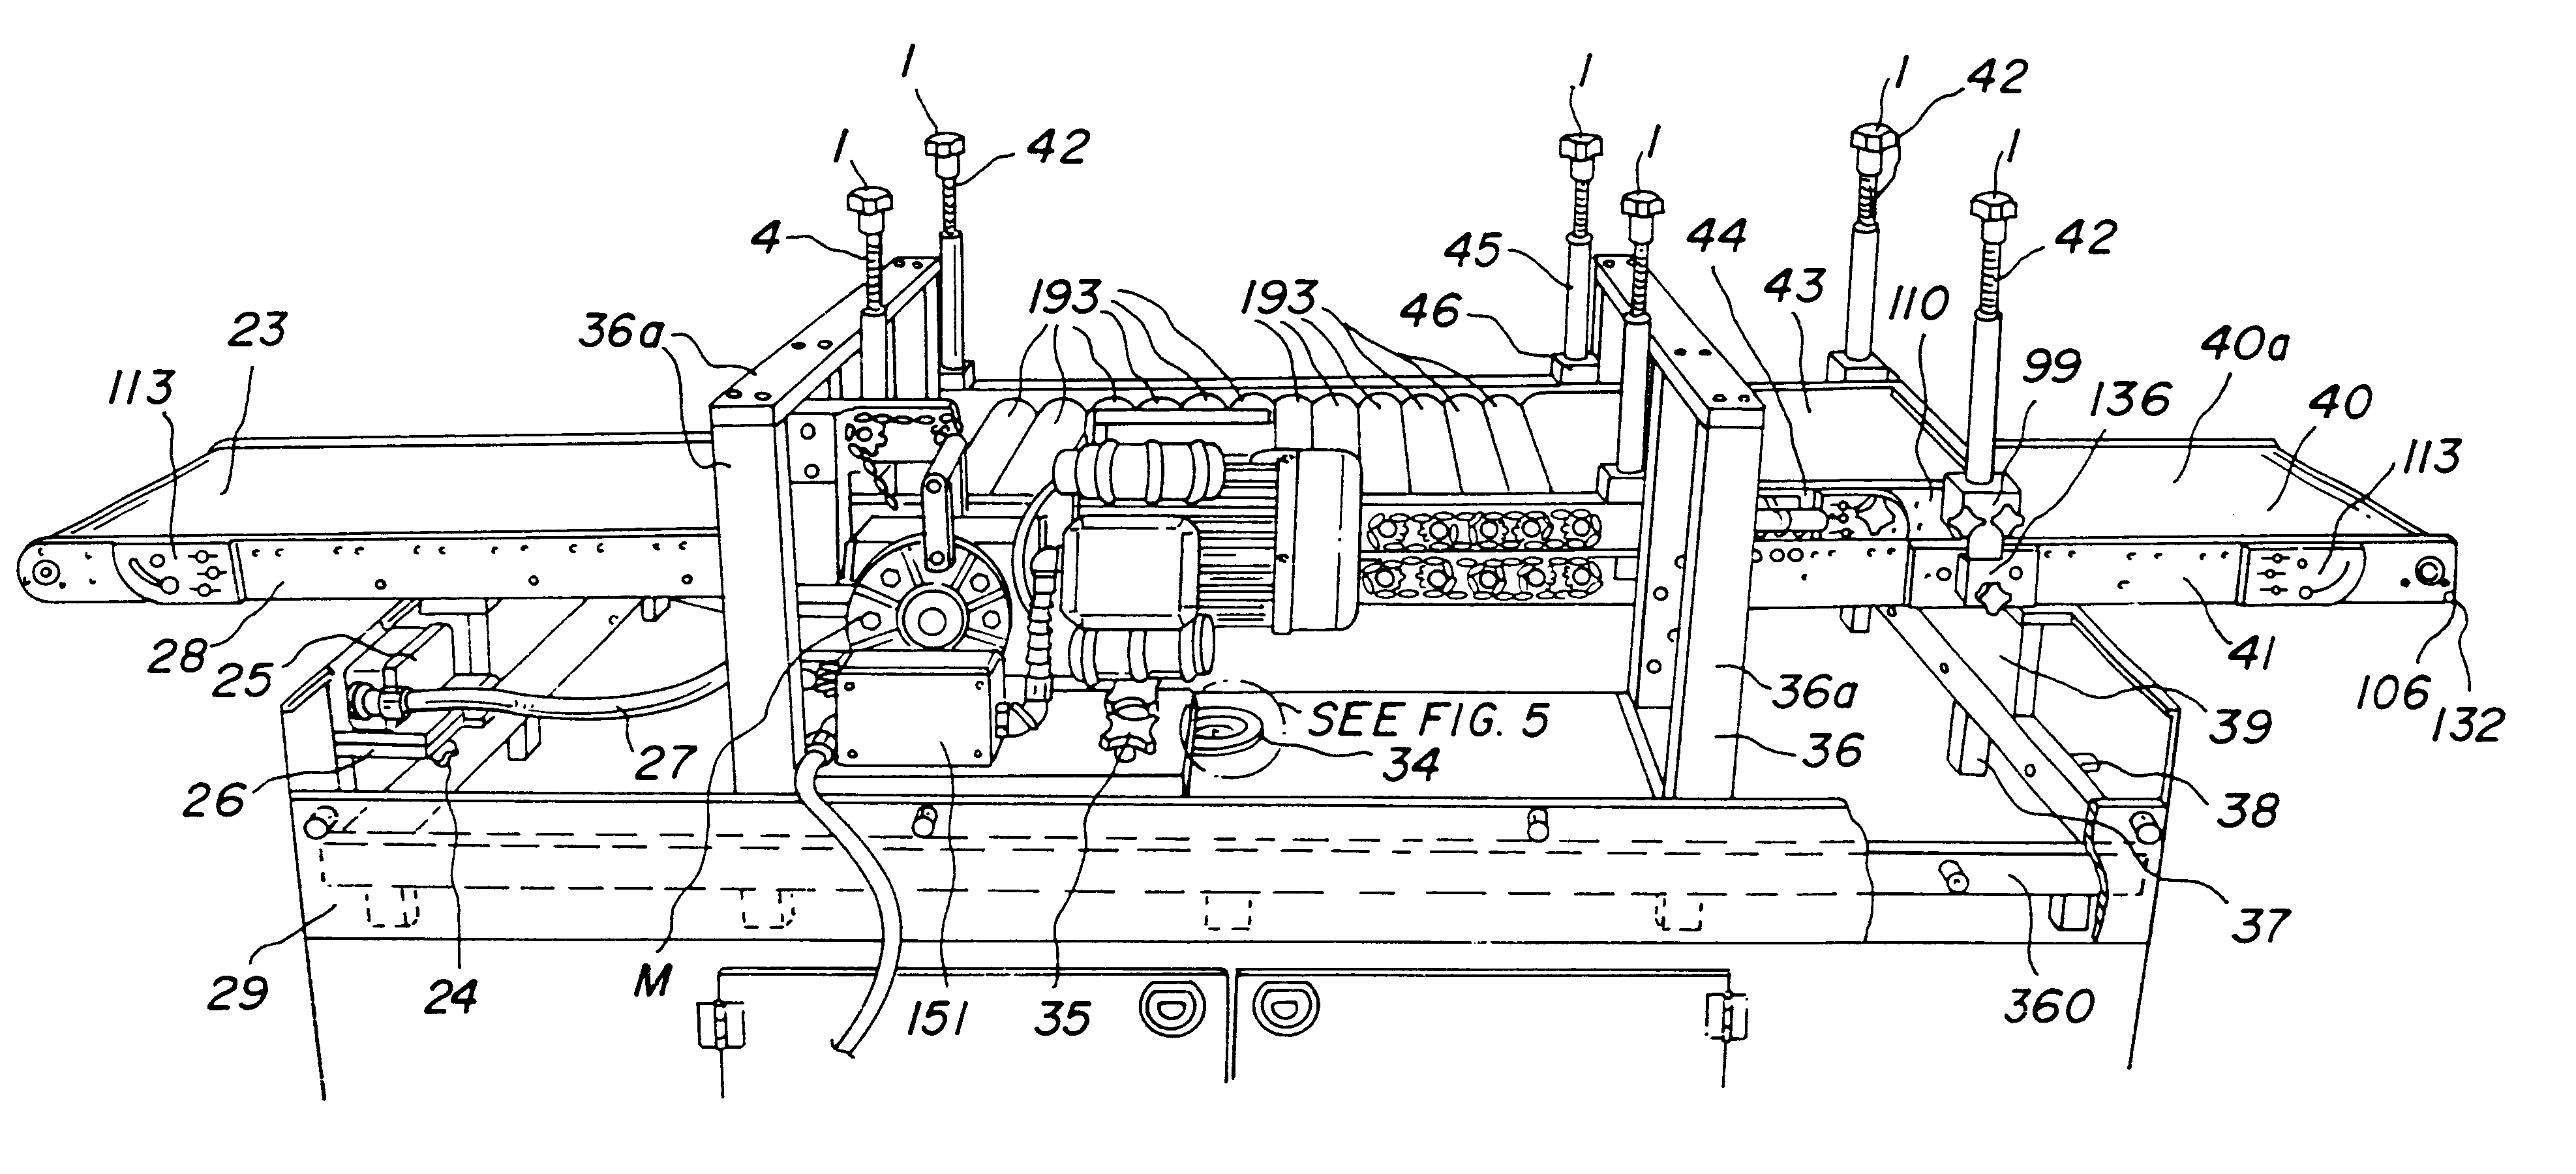 Apparatus for marinating, tenderizing, strip cutting cube cutting and progressively flattening meat